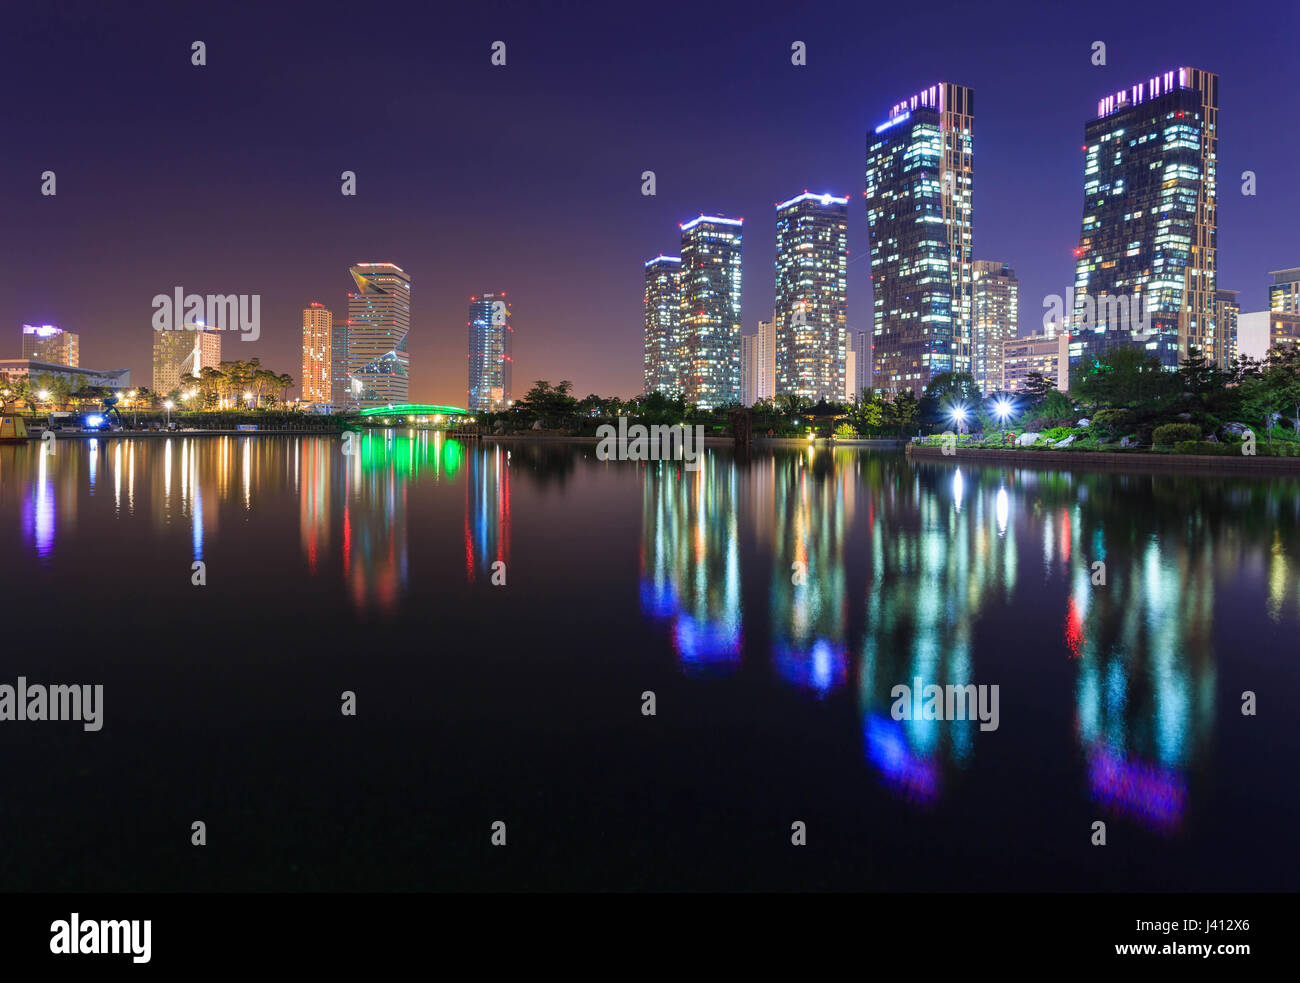 Songdo Central Park in Songdo International Business District, Incheon South Korea. Stock Photo